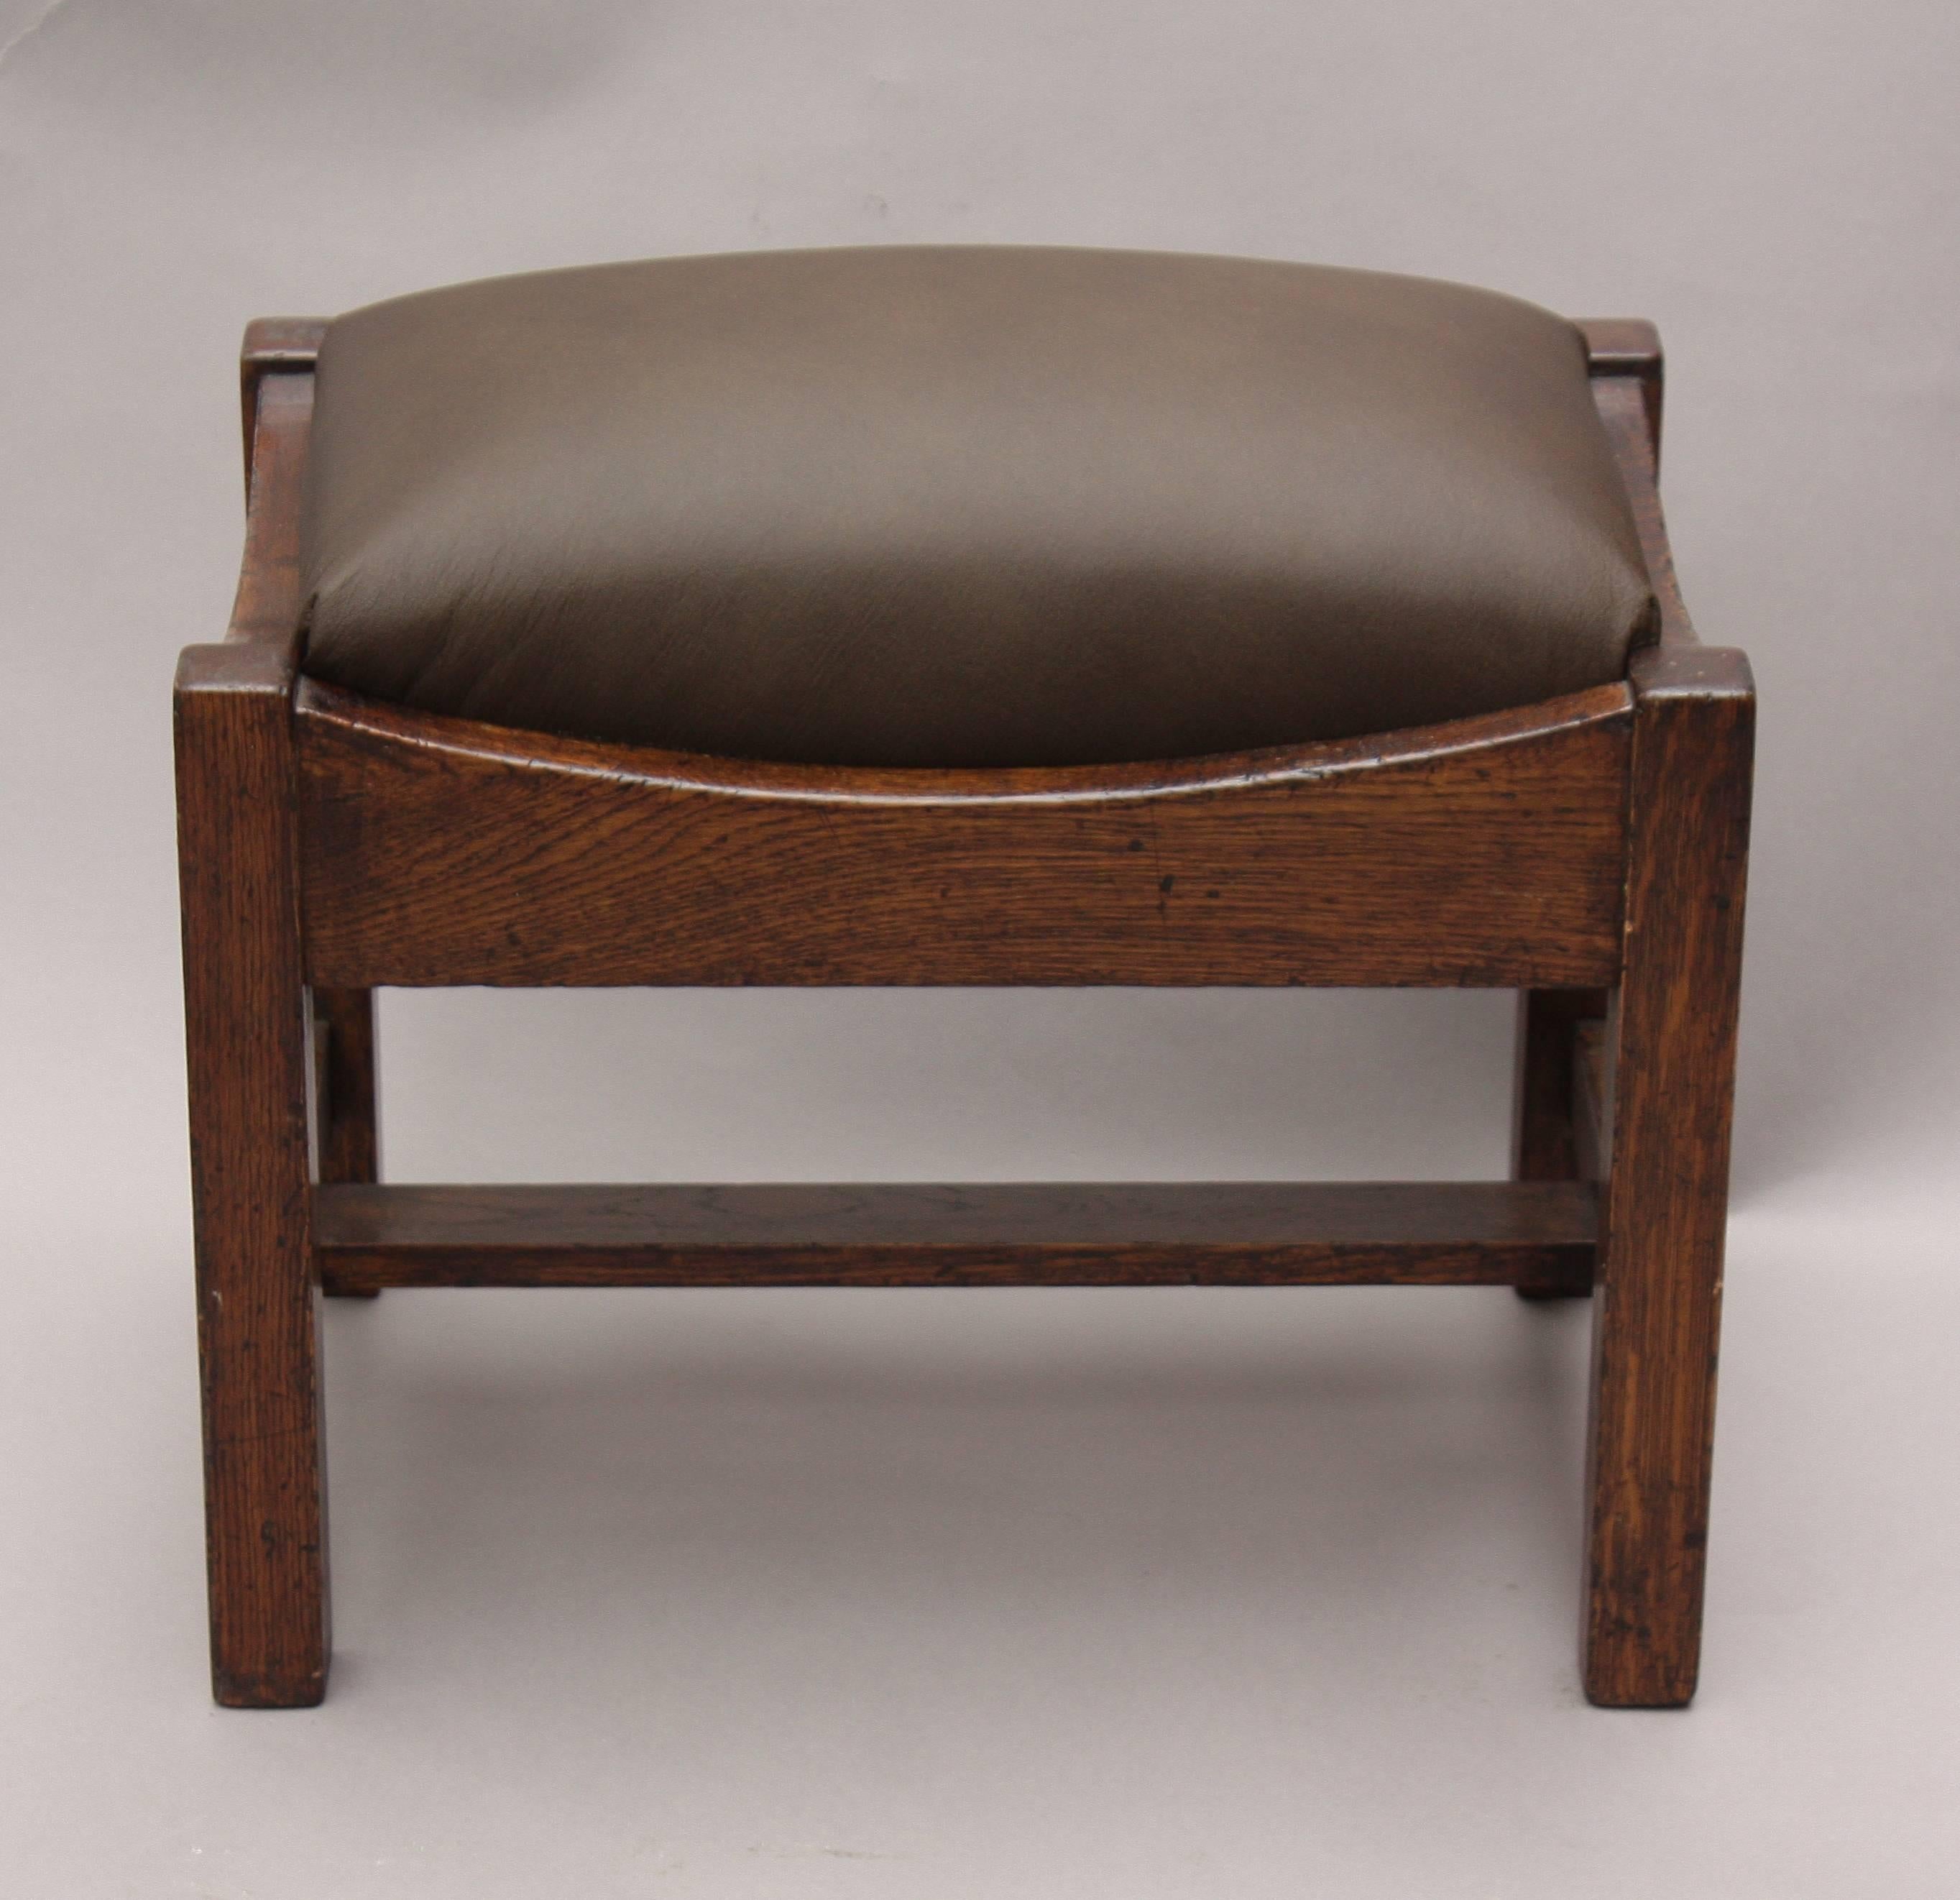 Craftsman period foot stool with new leather upholstery.